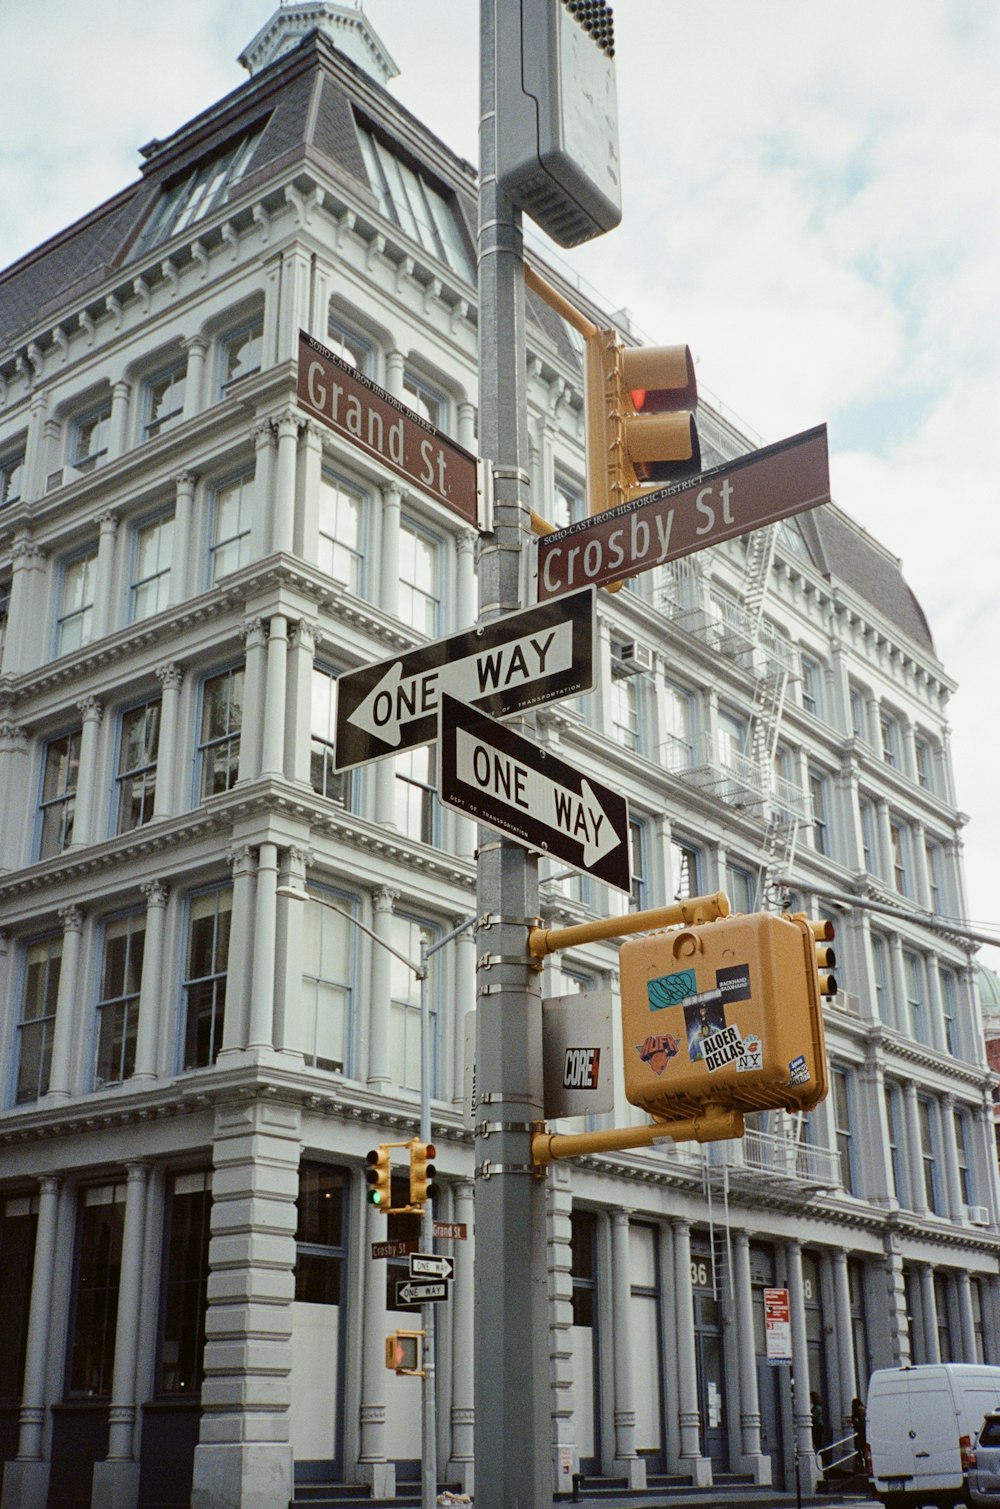 a pole with street signs and traffic lights in front of a building